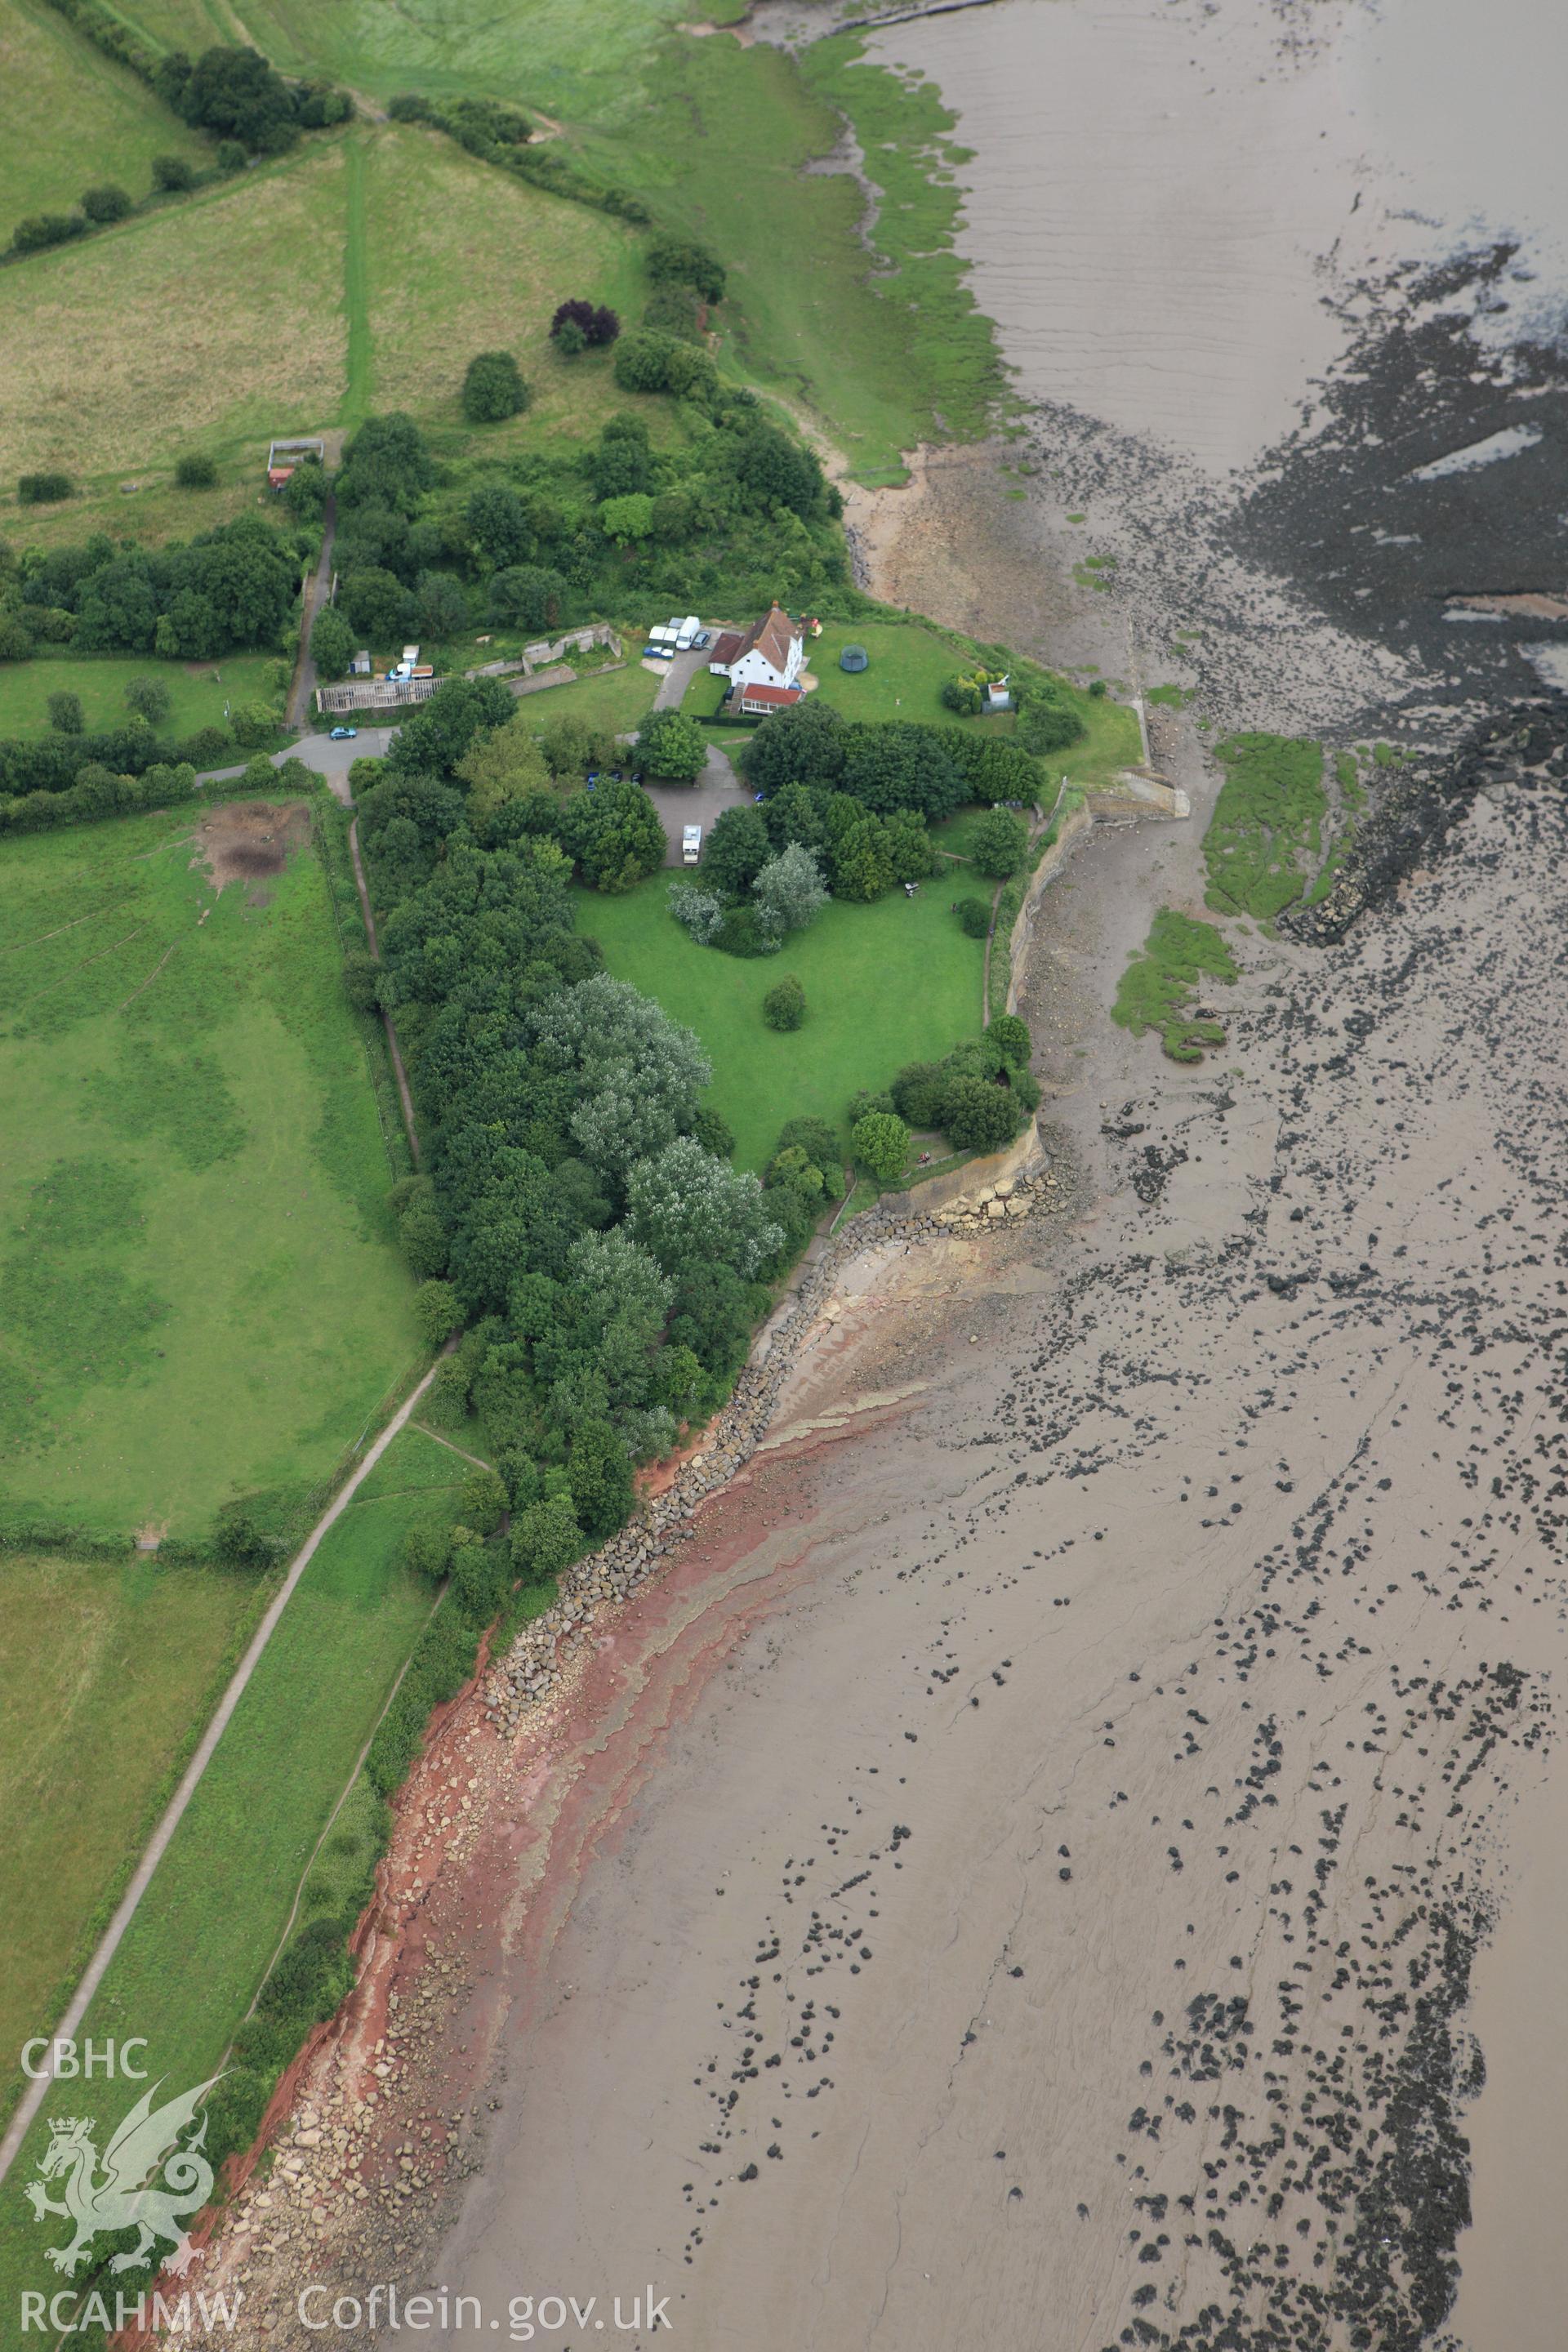 RCAHMW colour oblique aerial photograph of Black Rock Roman Ferry Site, Portskewett. Taken on 09 July 2009 by Toby Driver